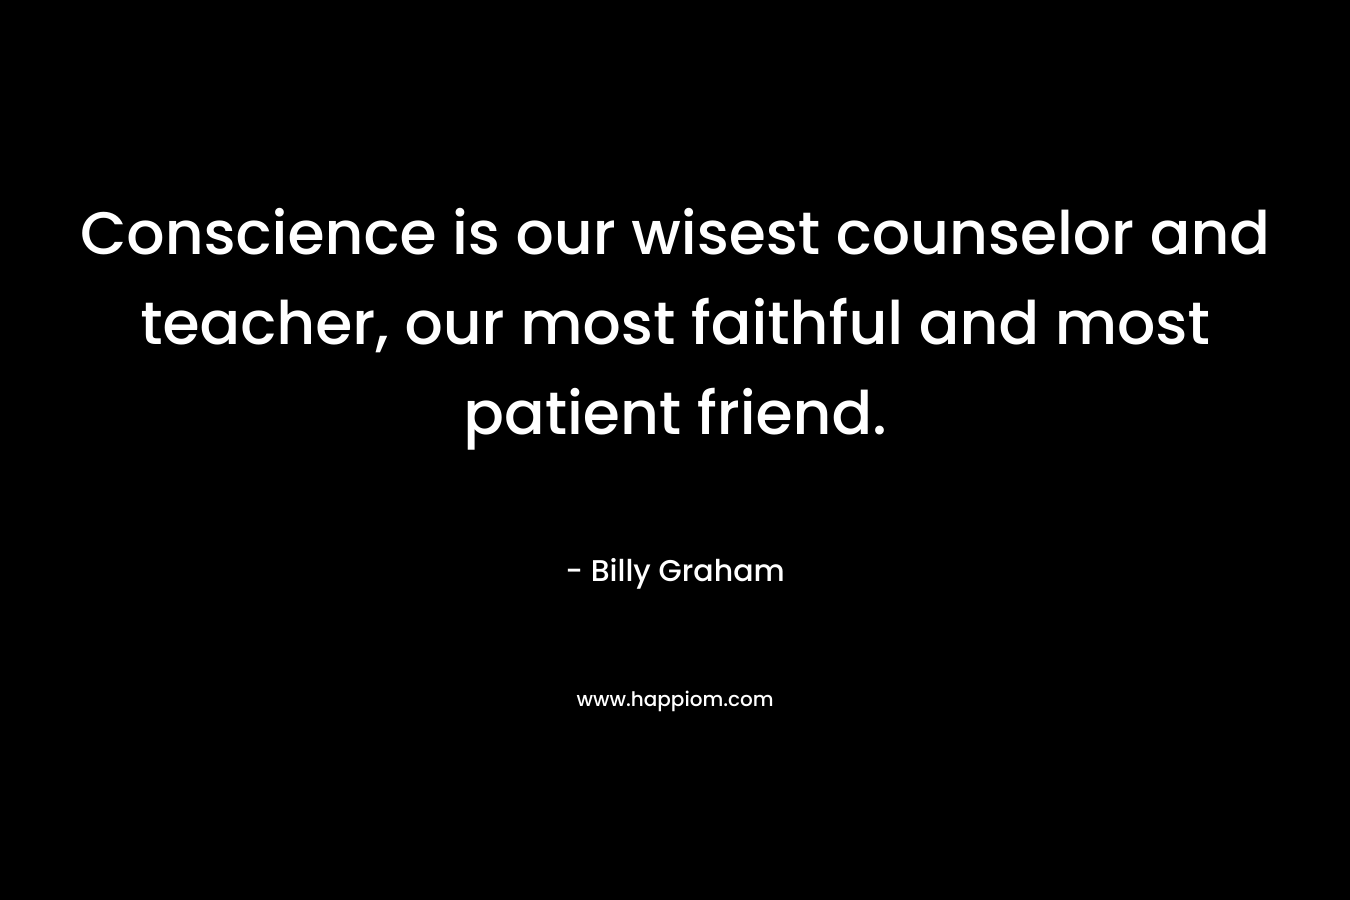 Conscience is our wisest counselor and teacher, our most faithful and most patient friend.